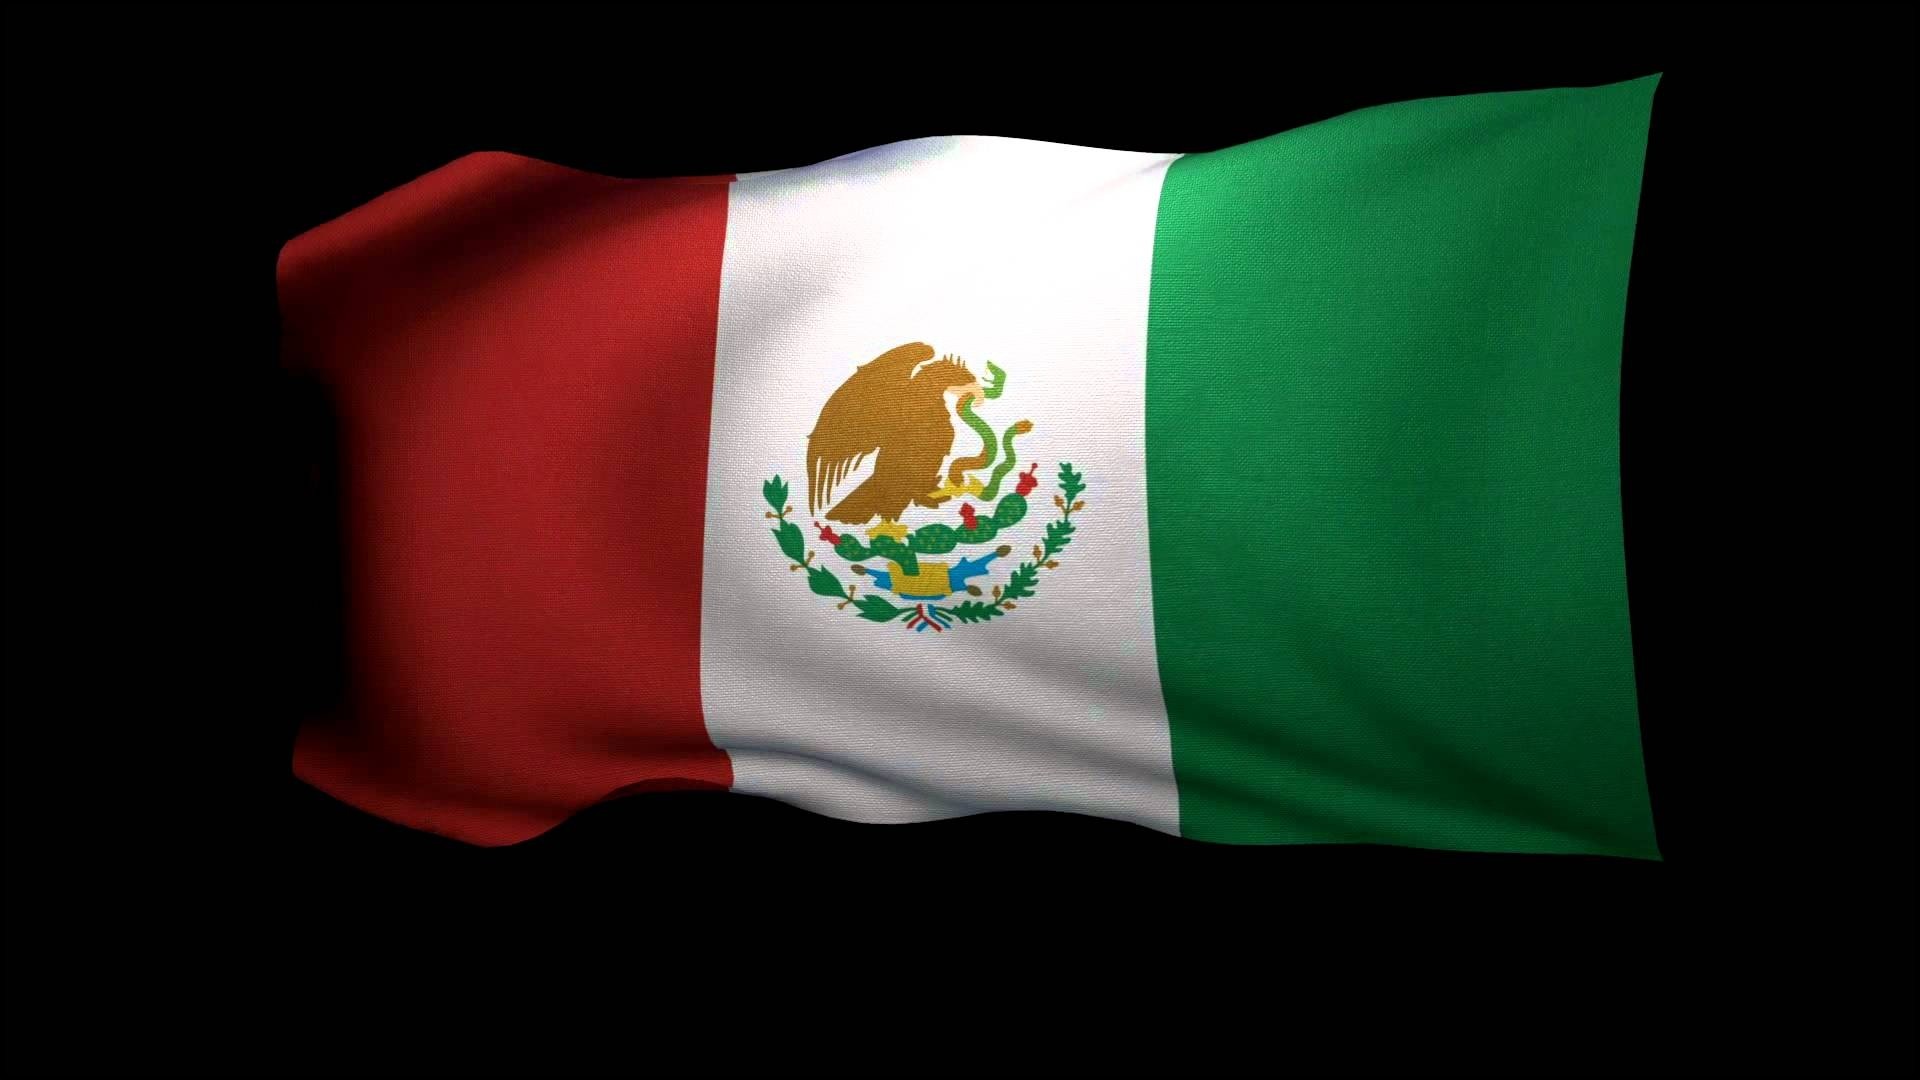 1920x1080  Download free cool mexican wallpaper pic - wallpaperelements.com  Â· Download Â· cool mexican wallpapers ...